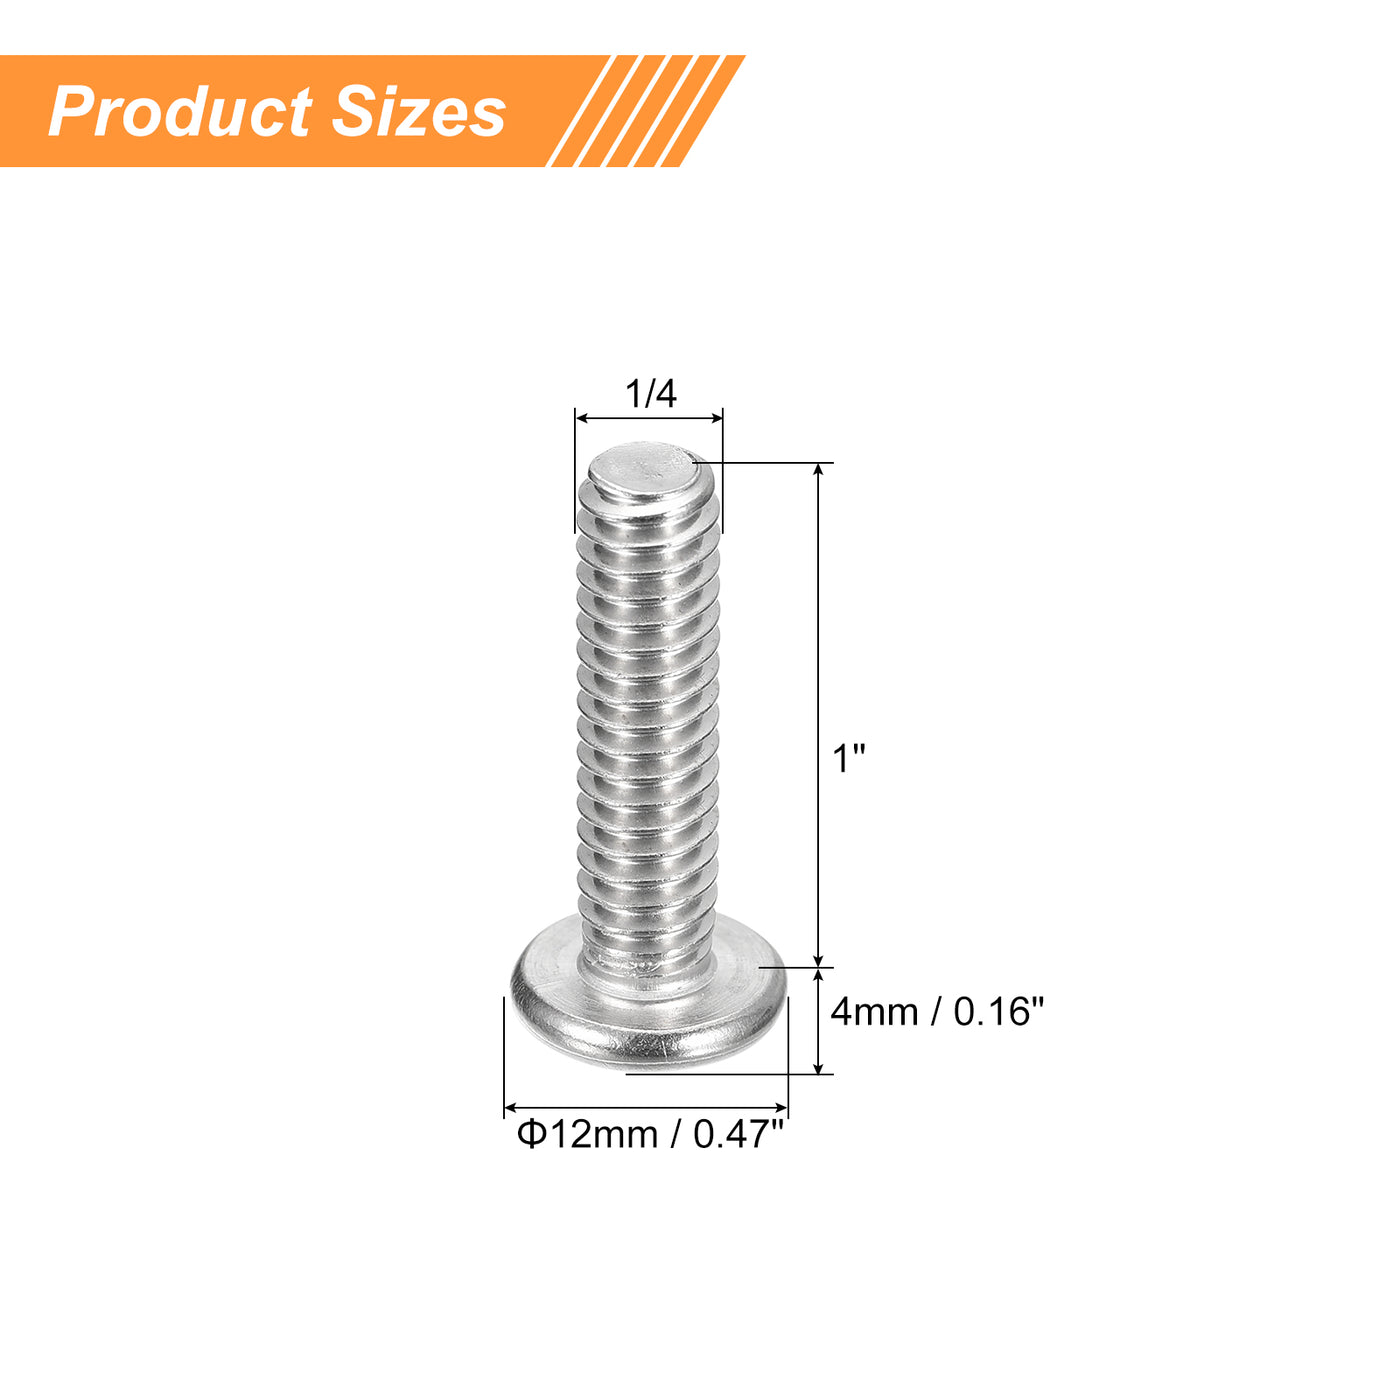 uxcell Uxcell 1/4-20x1" Pan Head Machine Screws, Stainless Steel 18-8 Screw, Pack of 20